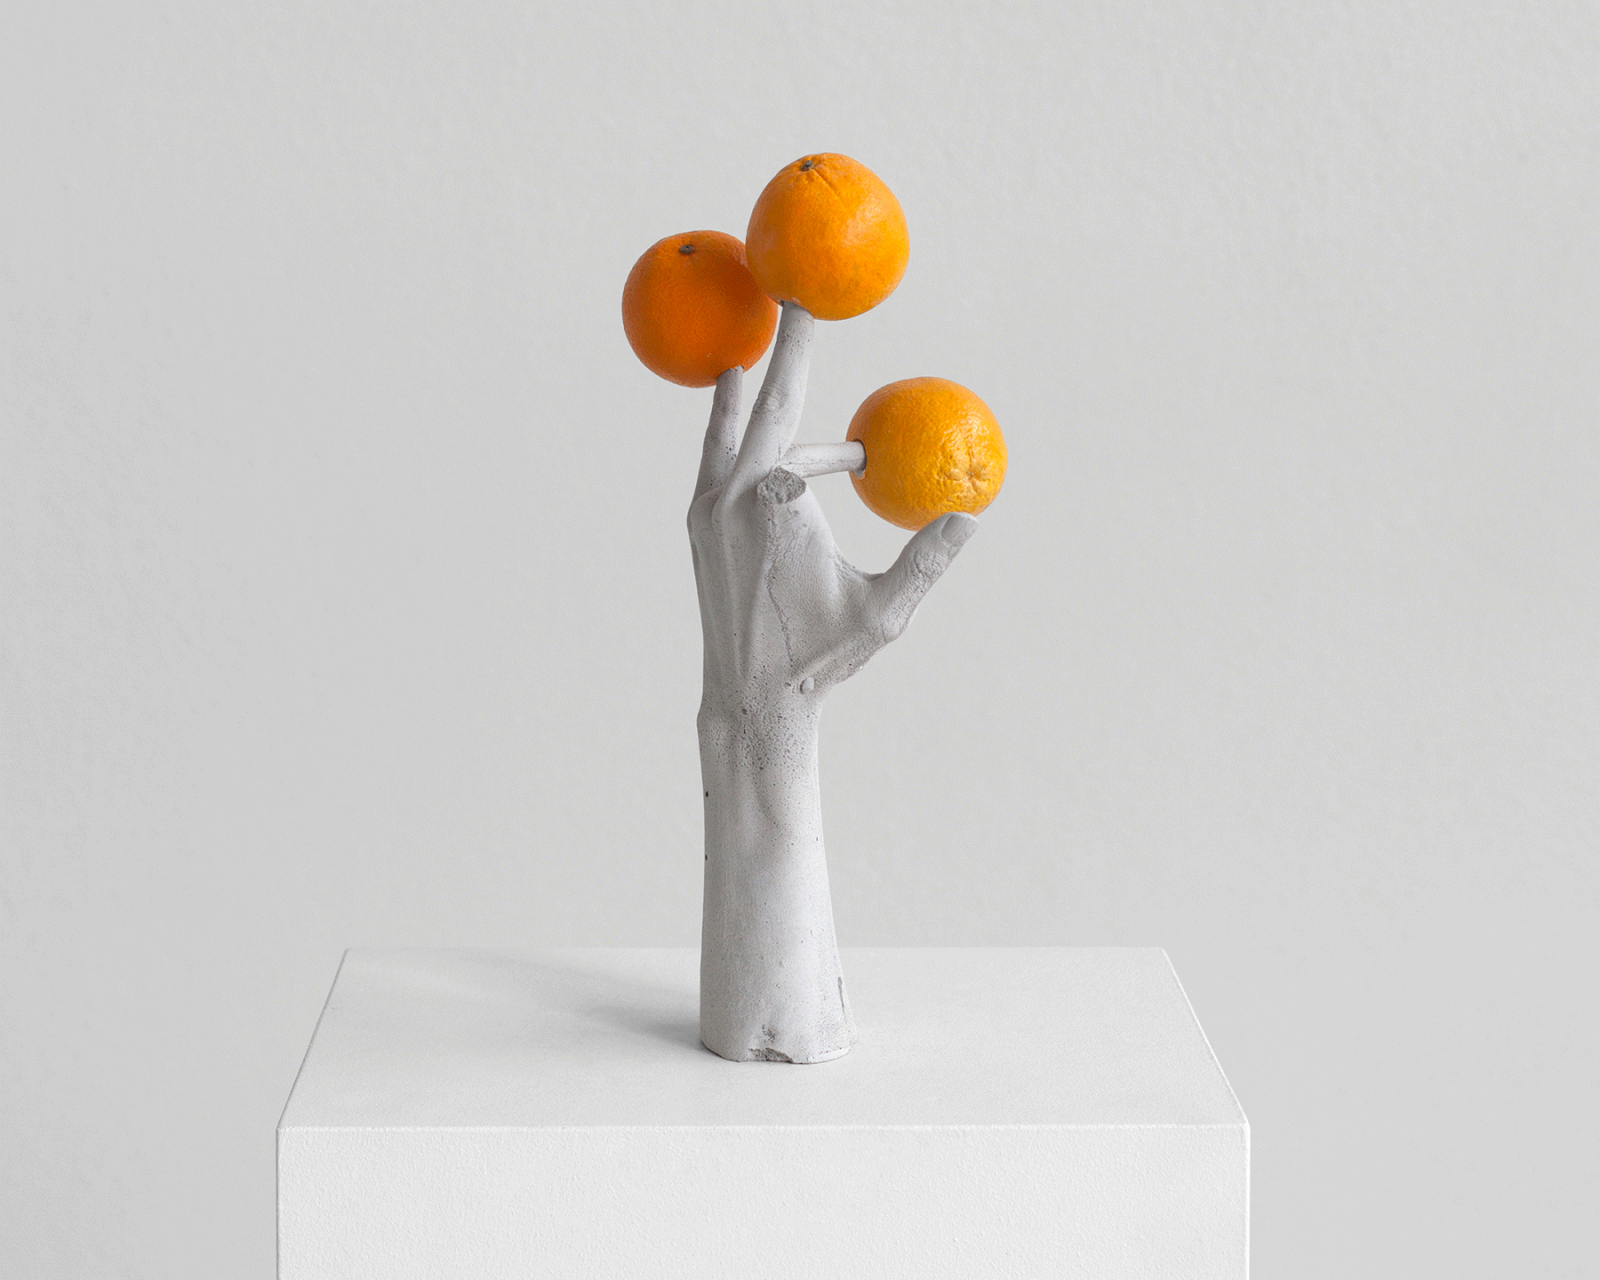 ERWIN WURM, One Minute forever (hands/fruits), 2019